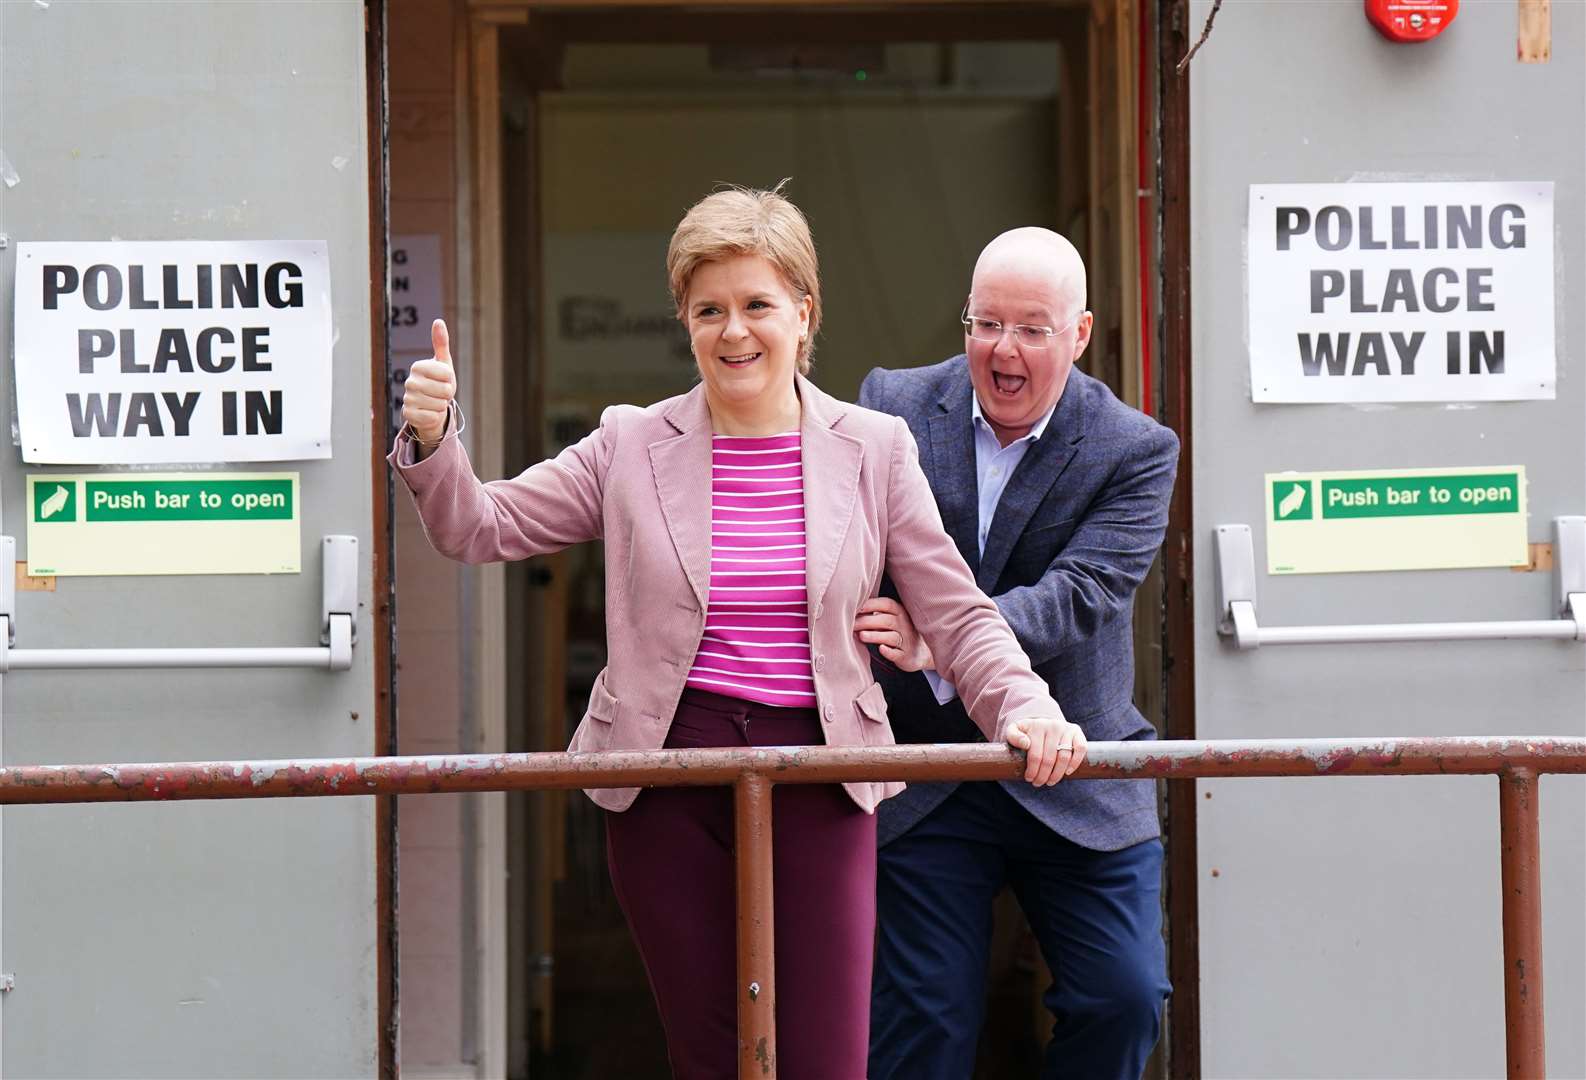 Nicola Sturgeon with her husband Peter Murrell, who announced on Saturday he was quitting as SNP chief executive with immediate effect (Jane Barlow/PA)